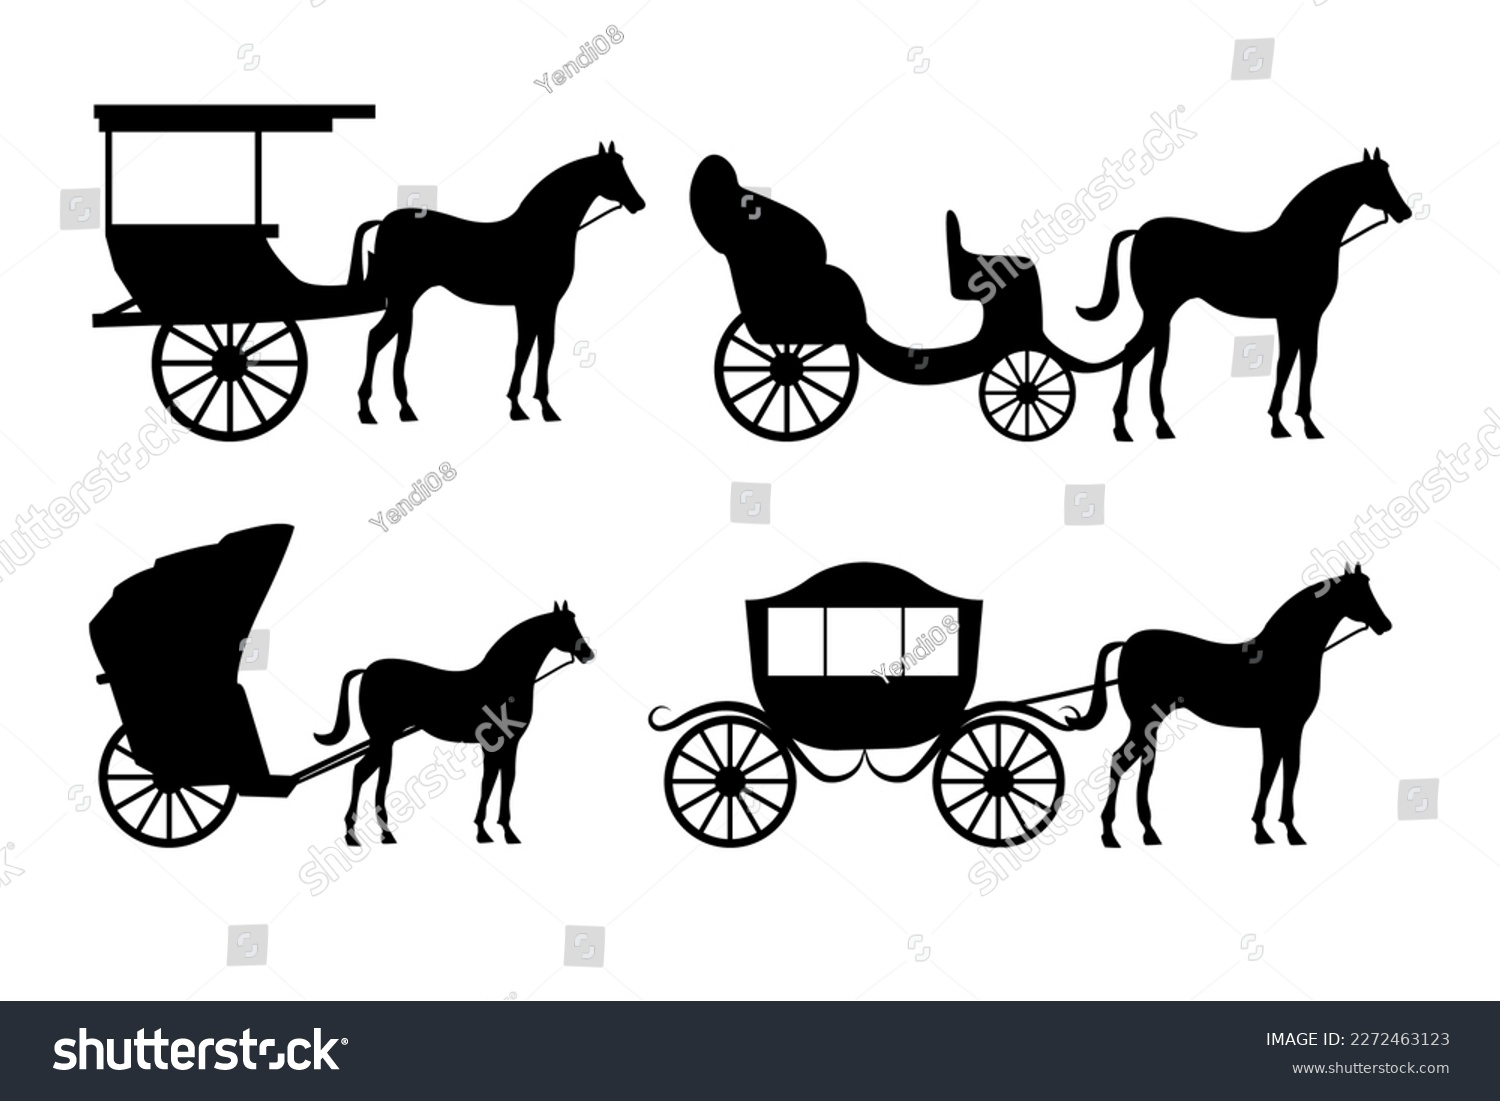 SVG of Horse carriage silhouette, isolated and trendy. Horse carriage background for website logo design, app, UI. Vector icon illustration, EPS10. svg